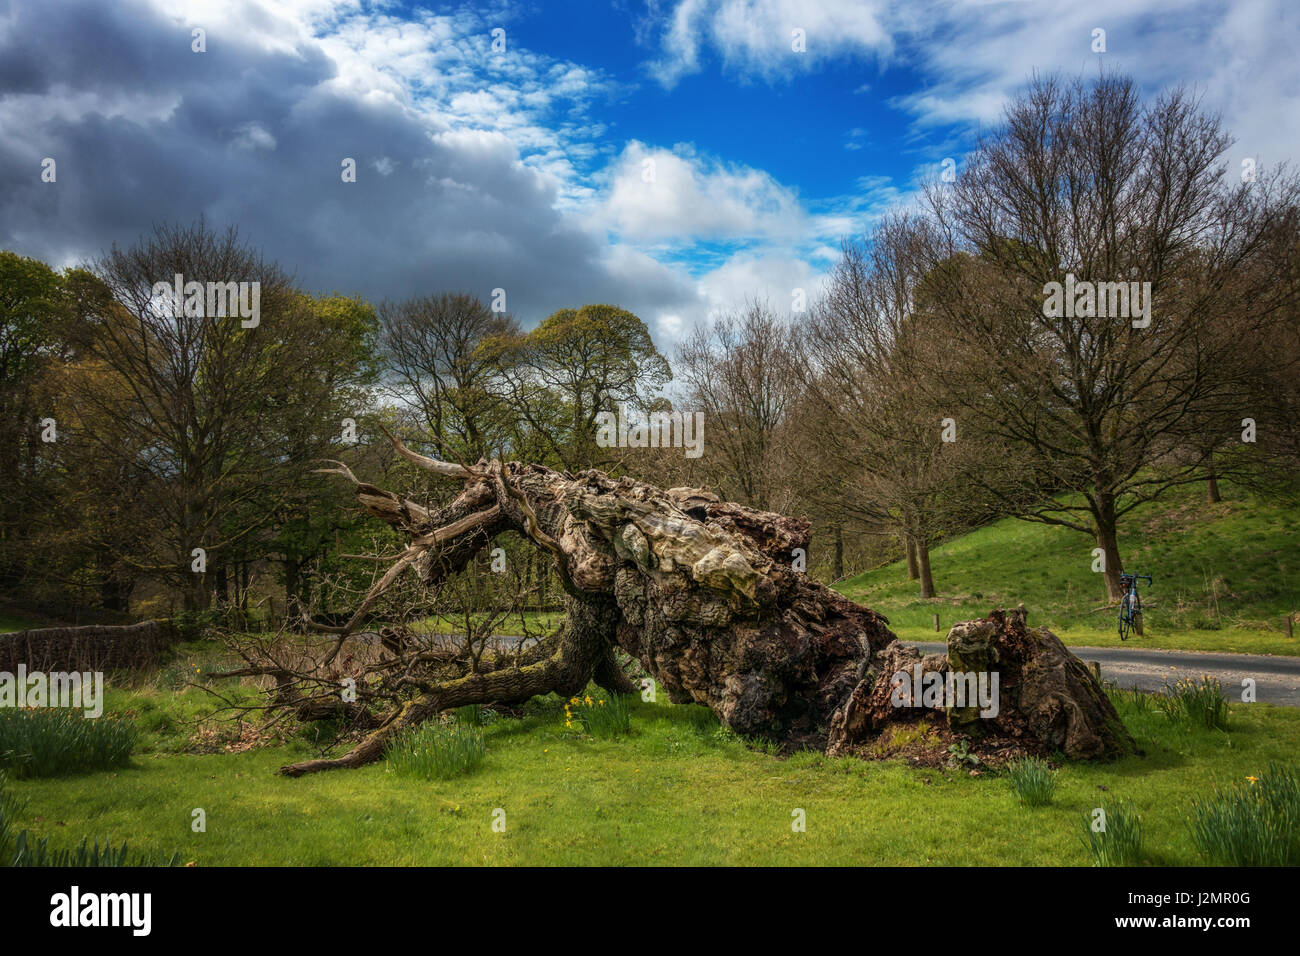 The famous Laund Oak at Bolton Abbey fell in 2016 but this spring sees new buds on the 800 year old oak tree.  Yorkshire Dales, England, UK Stock Photo